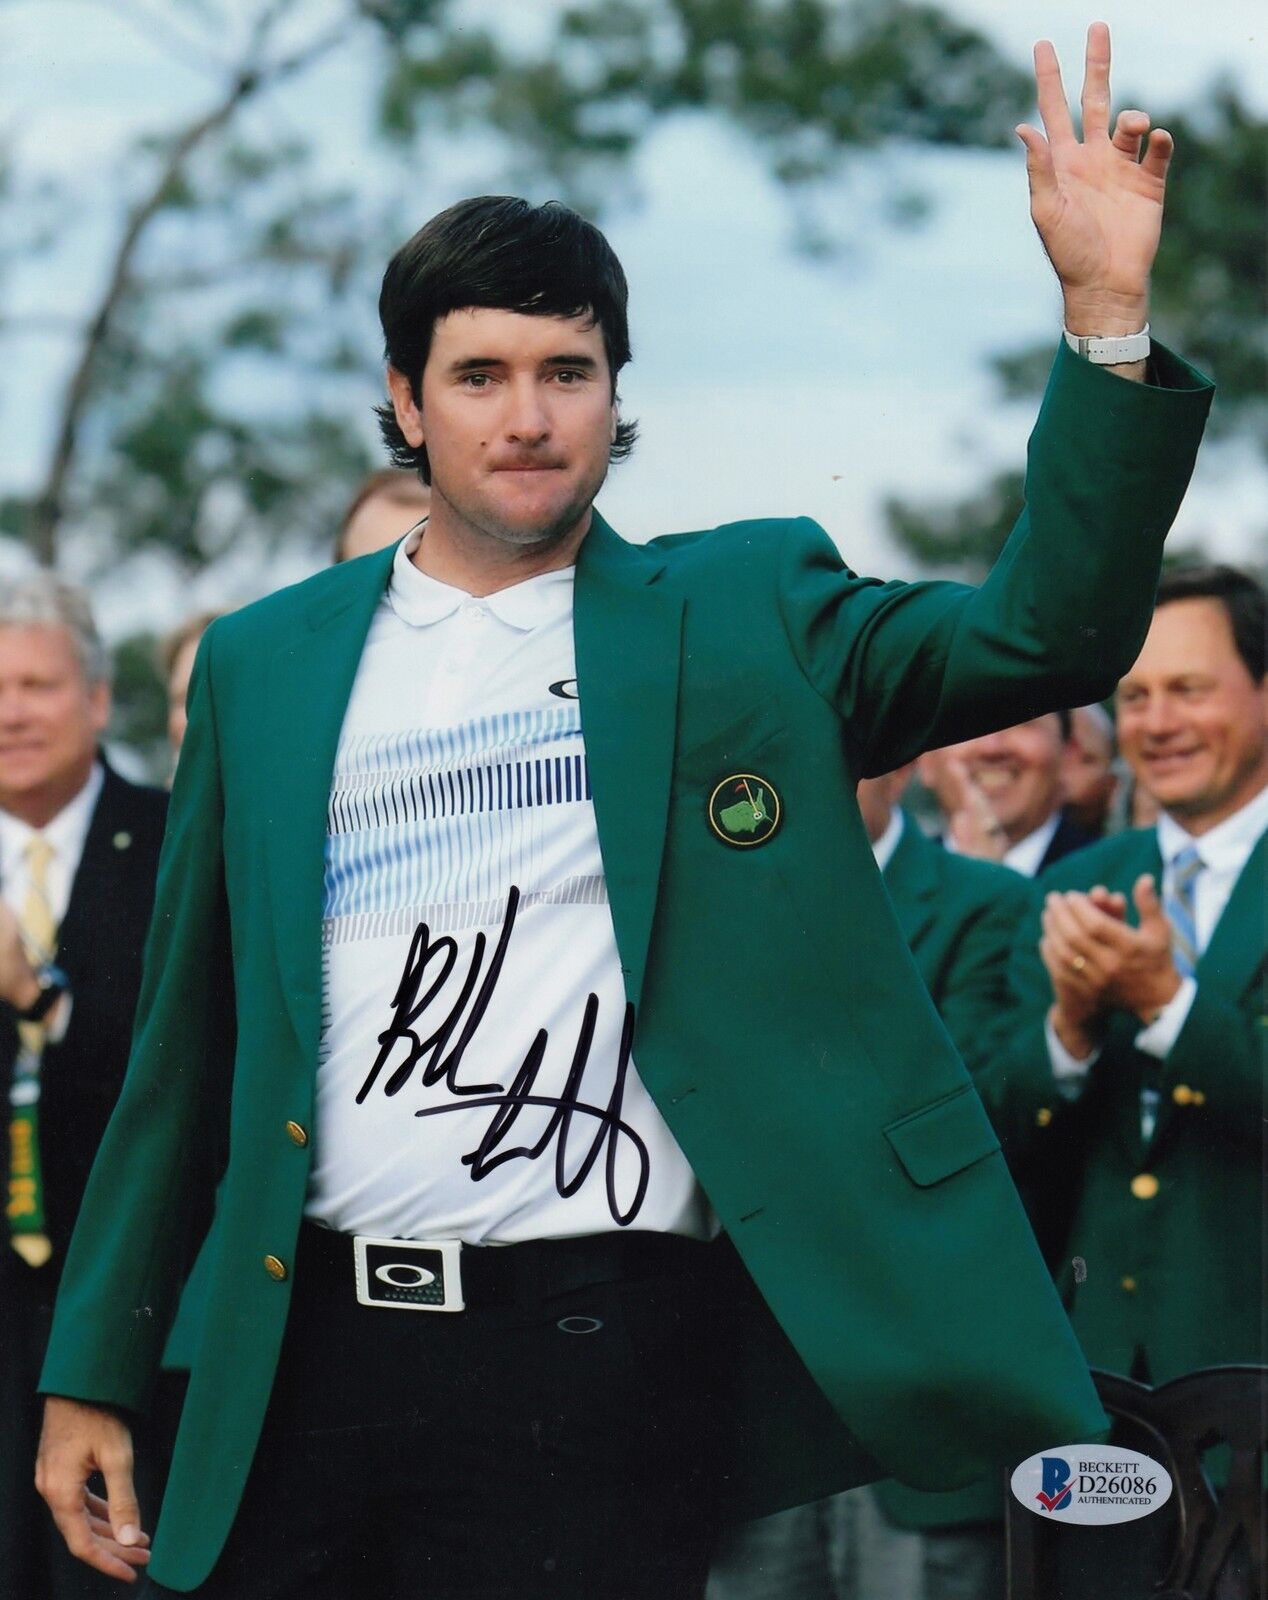 Bubba Watson 2014 Masters #0 8x10 Signed 8x10 Photo Poster painting Beckett Certified Golf 04